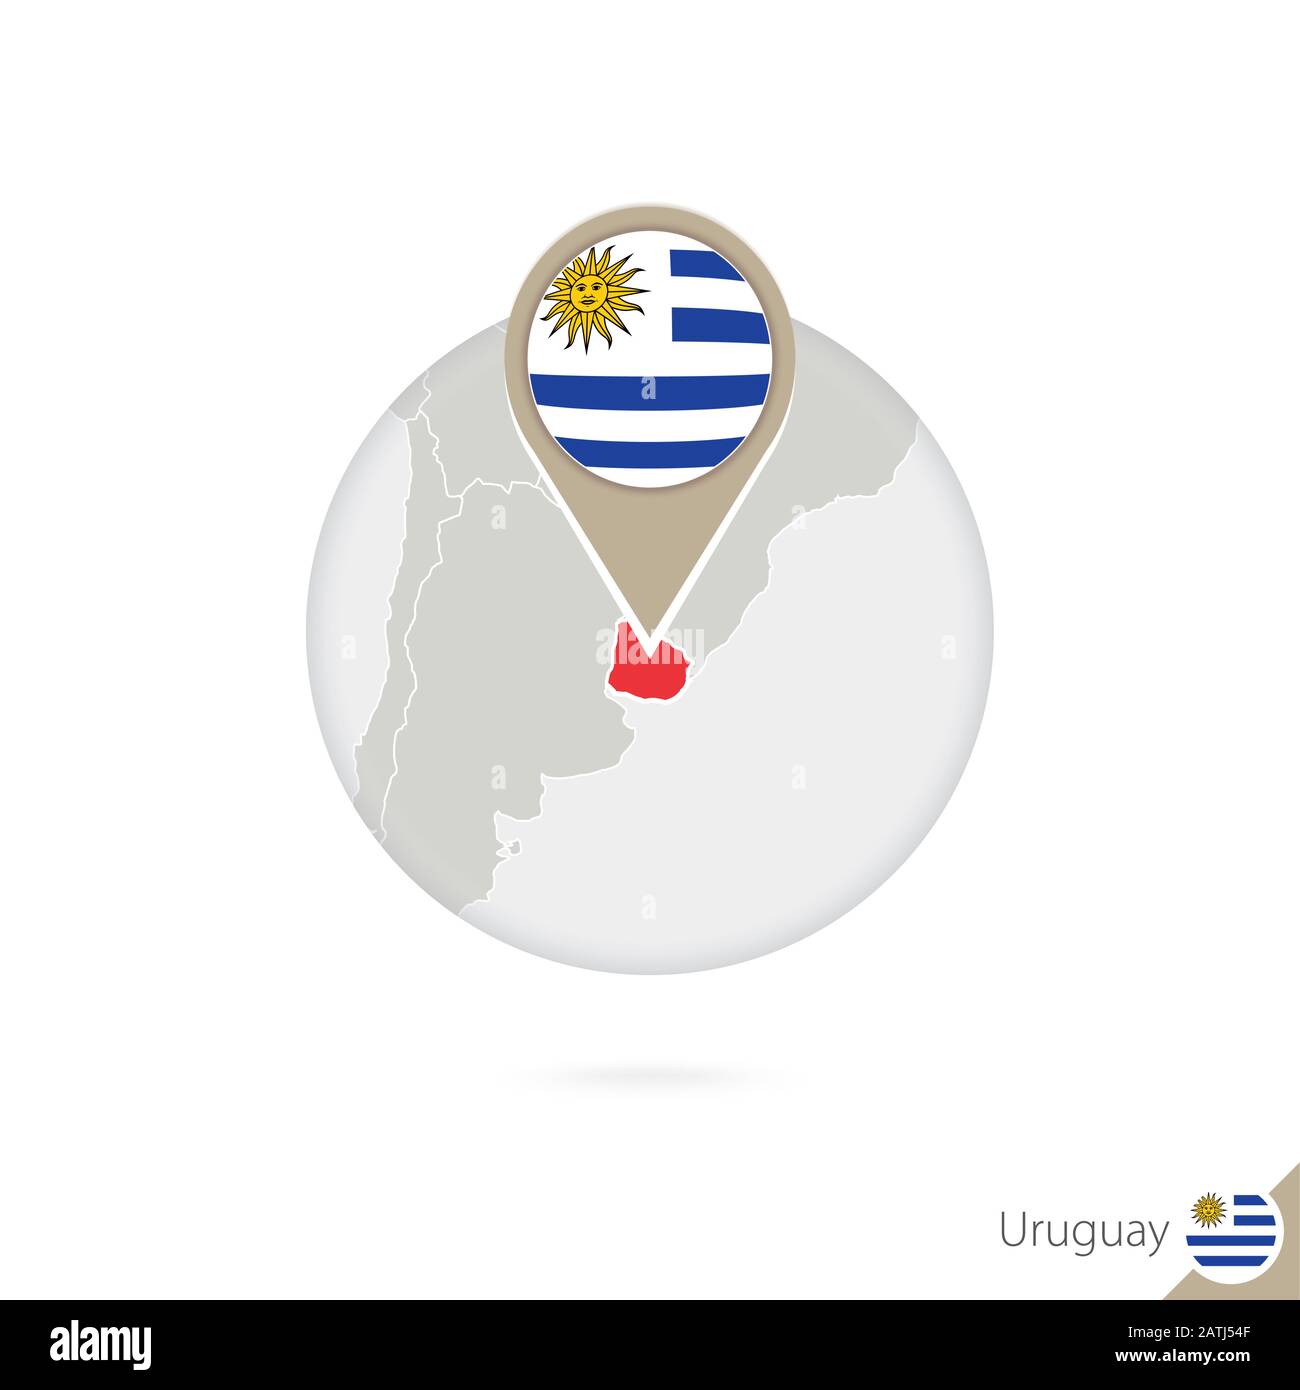 Uruguay map and flag in circle. Map of Uruguay, Uruguay flag pin. Map of Uruguay in the style of the globe. Vector Illustration. Stock Vector